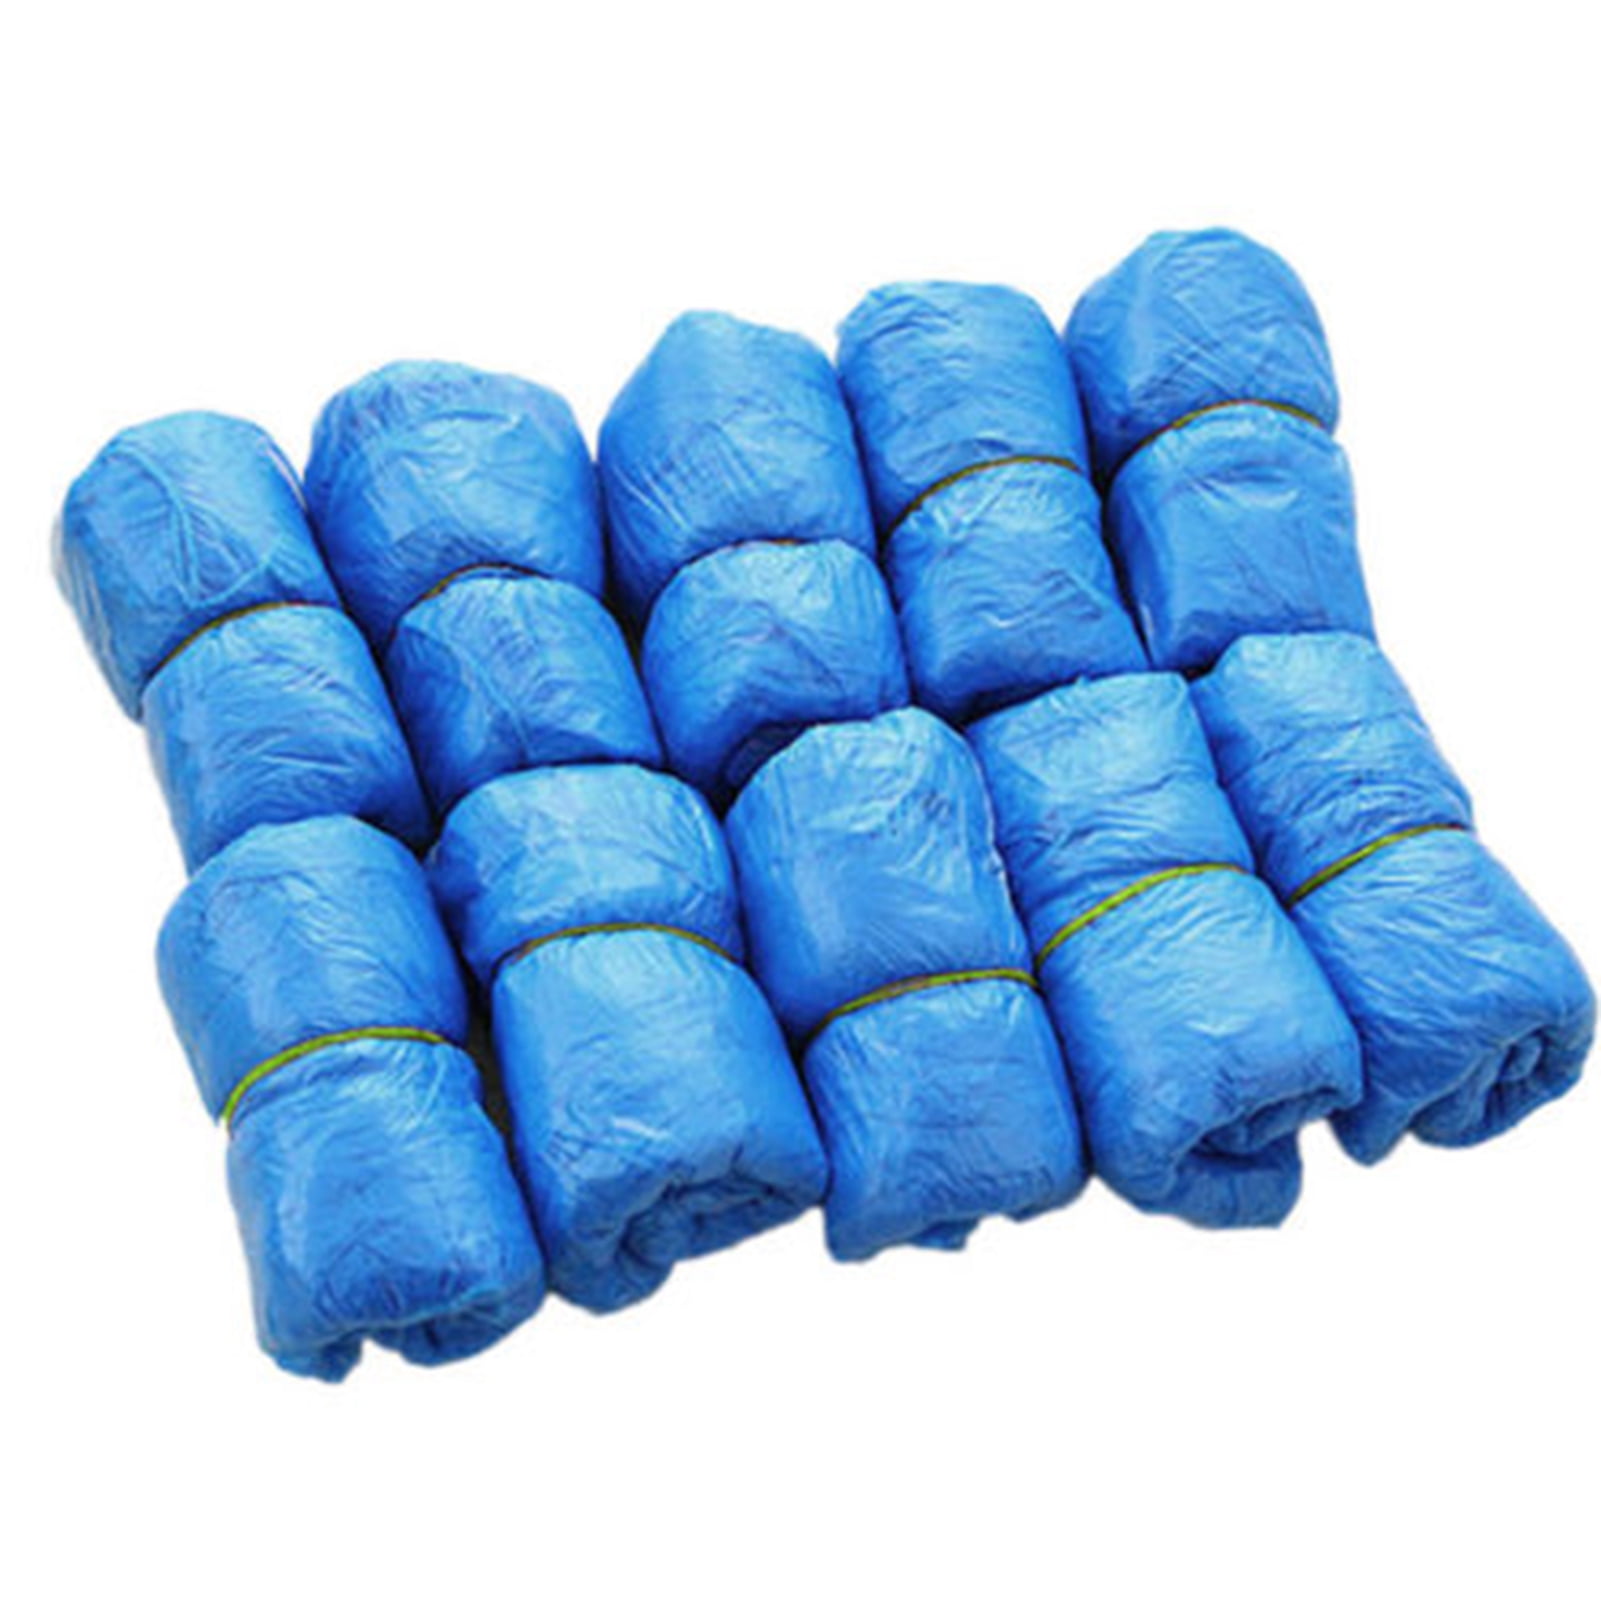 Blue Disposable Plastic Anti Slip Shoe Covers Cleaning Overshoes Protective